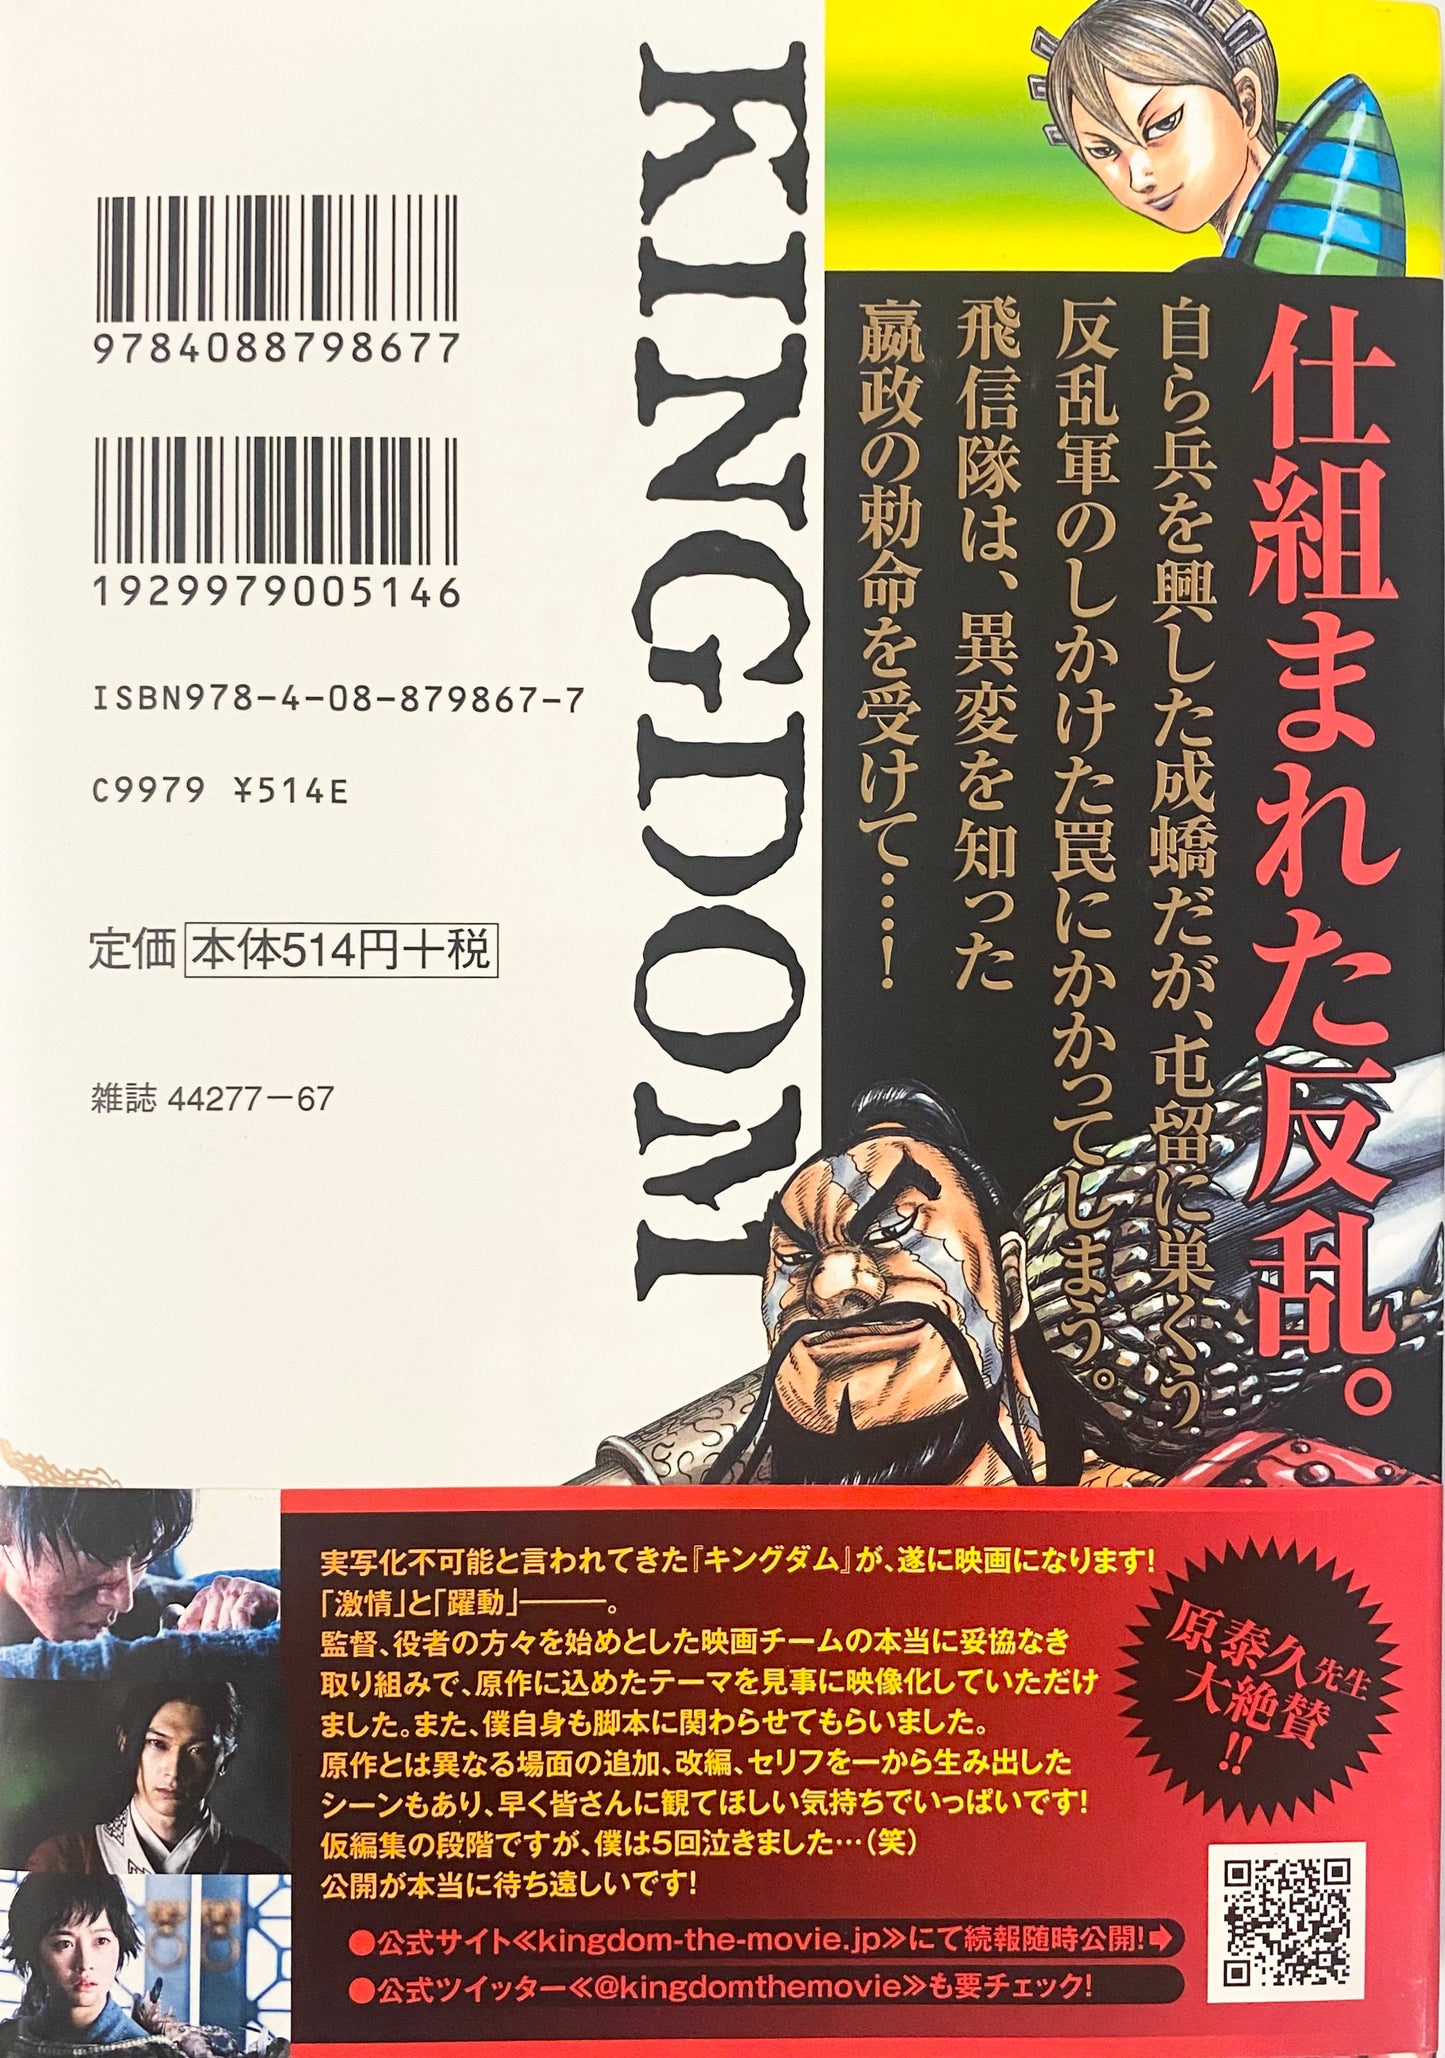 Kingdom Vol.35-Official Japanese Edition